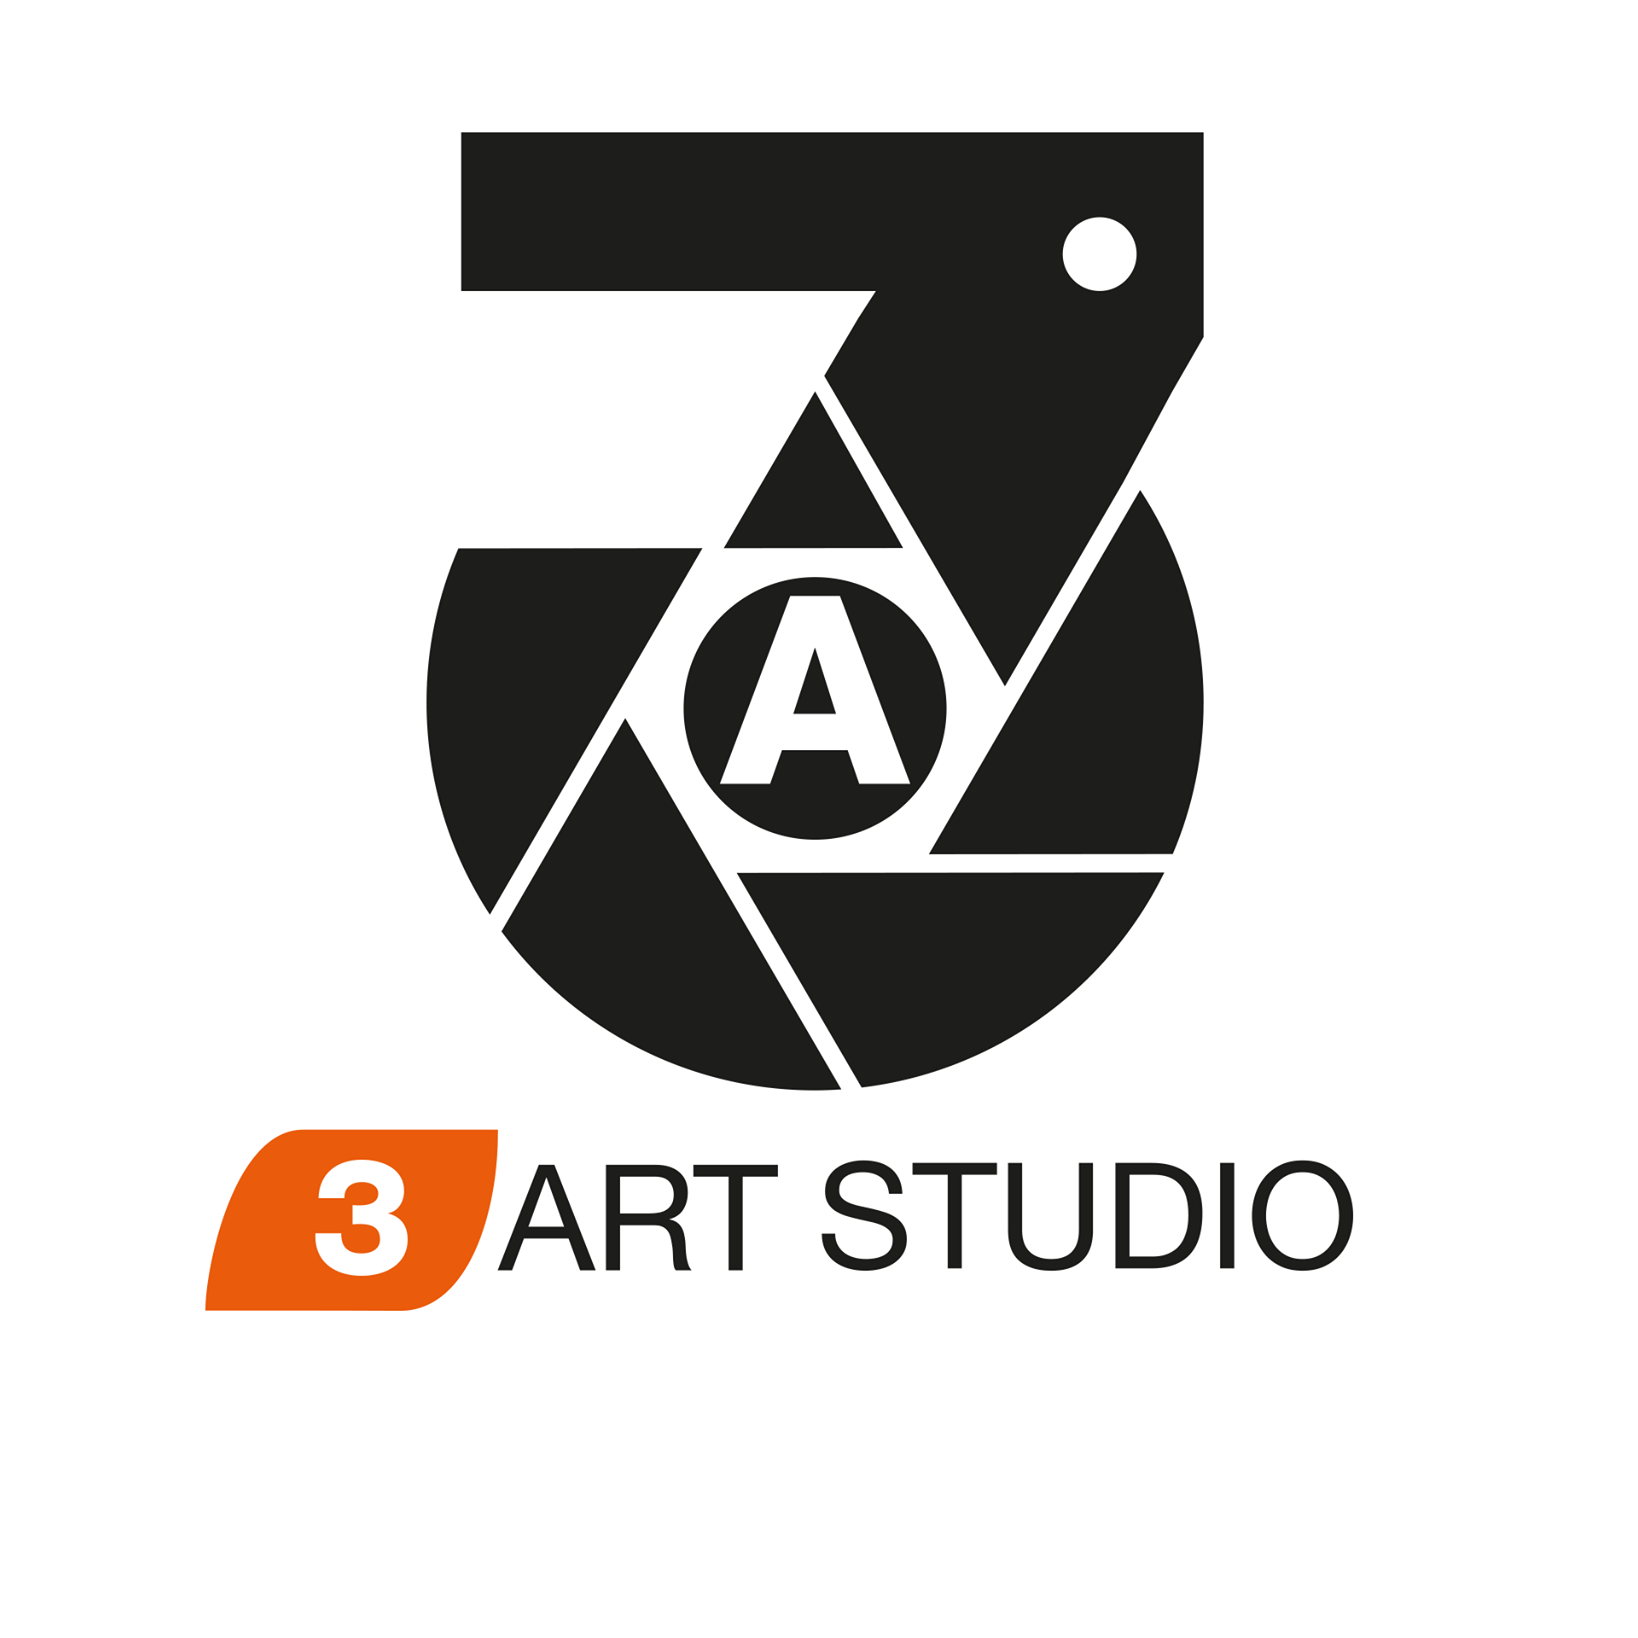 3 ART STUDIO|Catering Services|Event Services